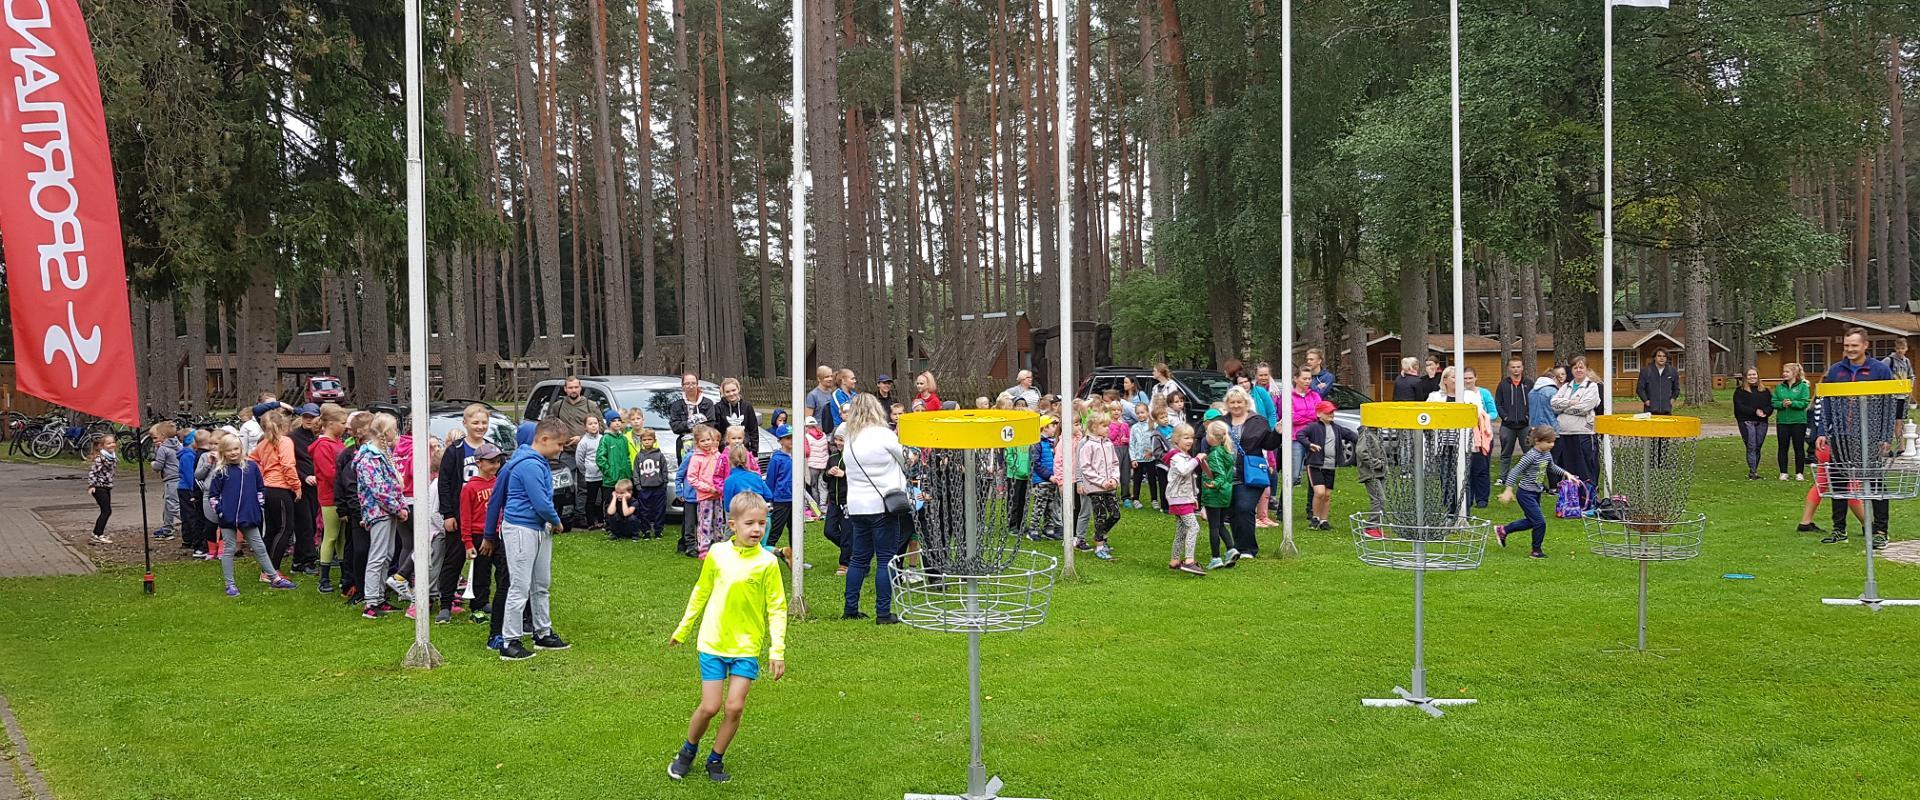 Tartu County Recreational Sports Centre is a great place for organising large events